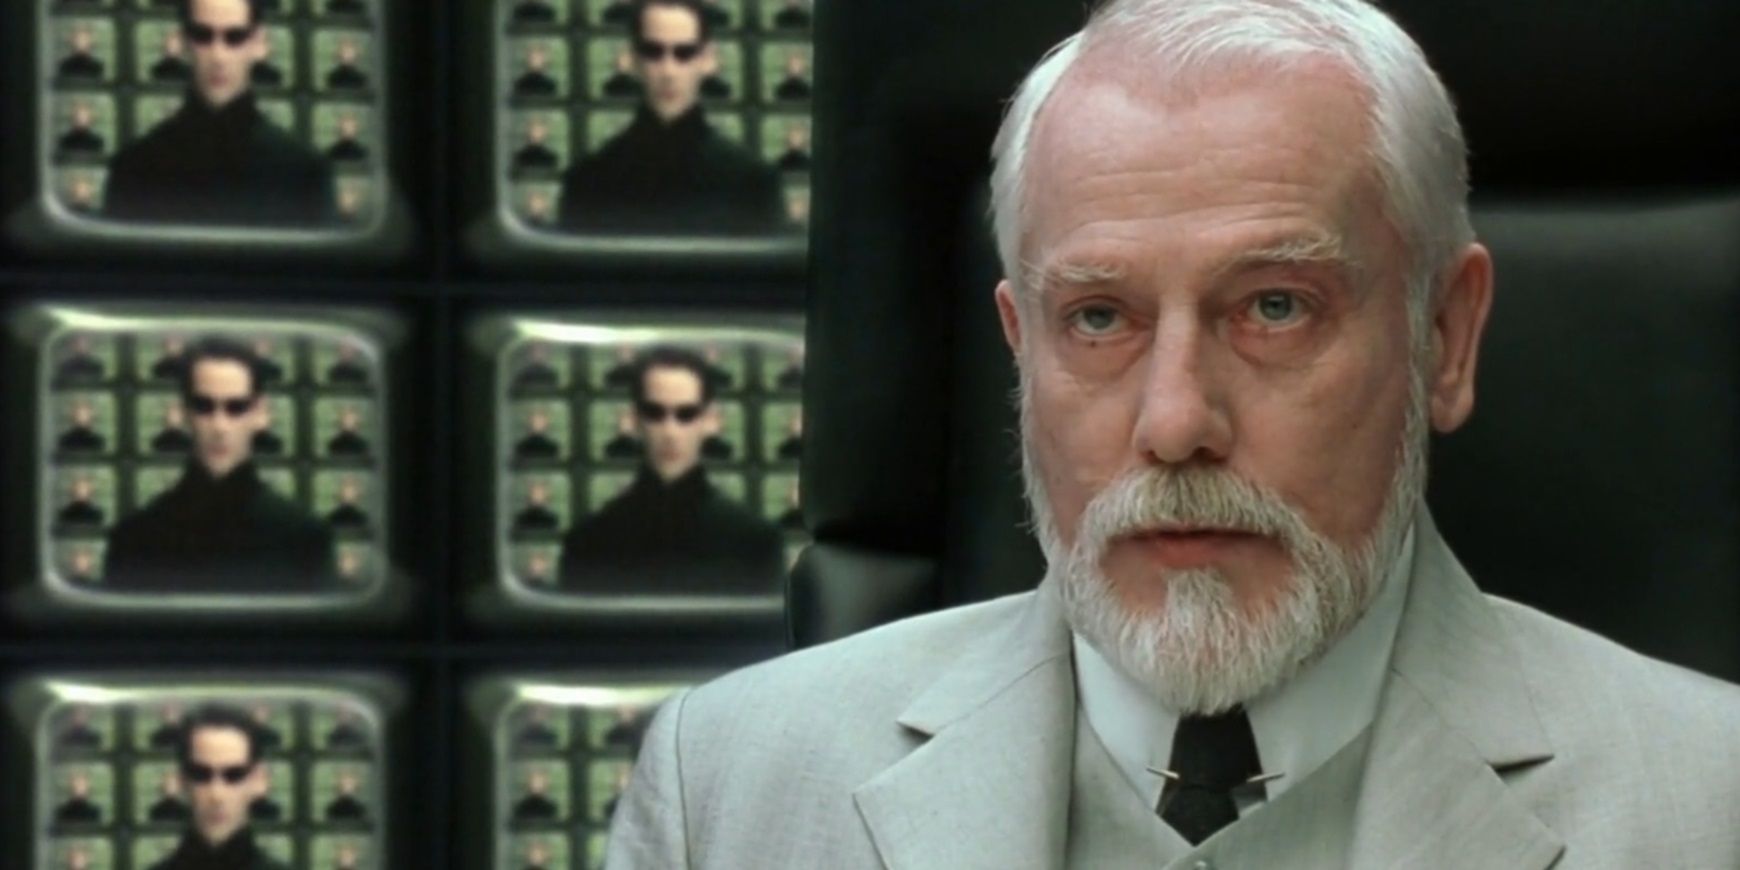 The Architect surrounded by TV screens in The Matrix Reloaded